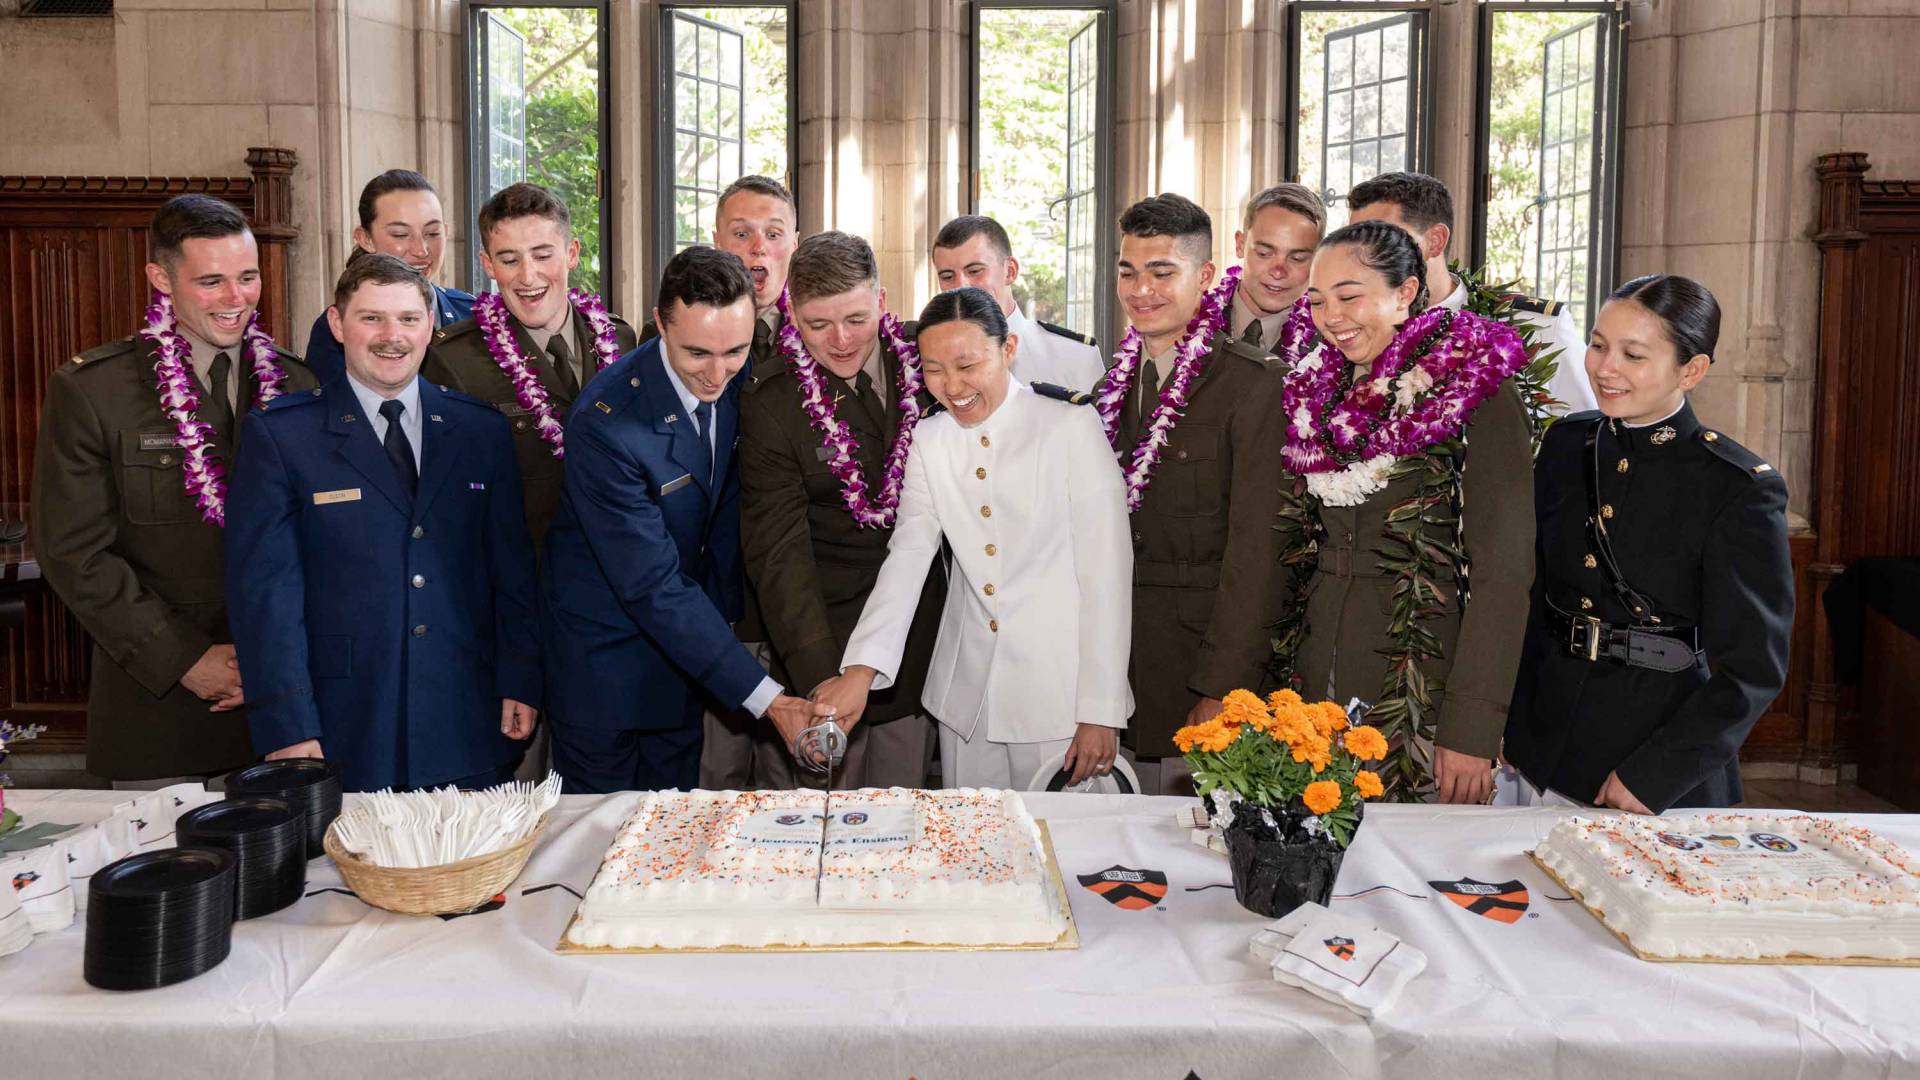 New ROTC cadets cutting cake